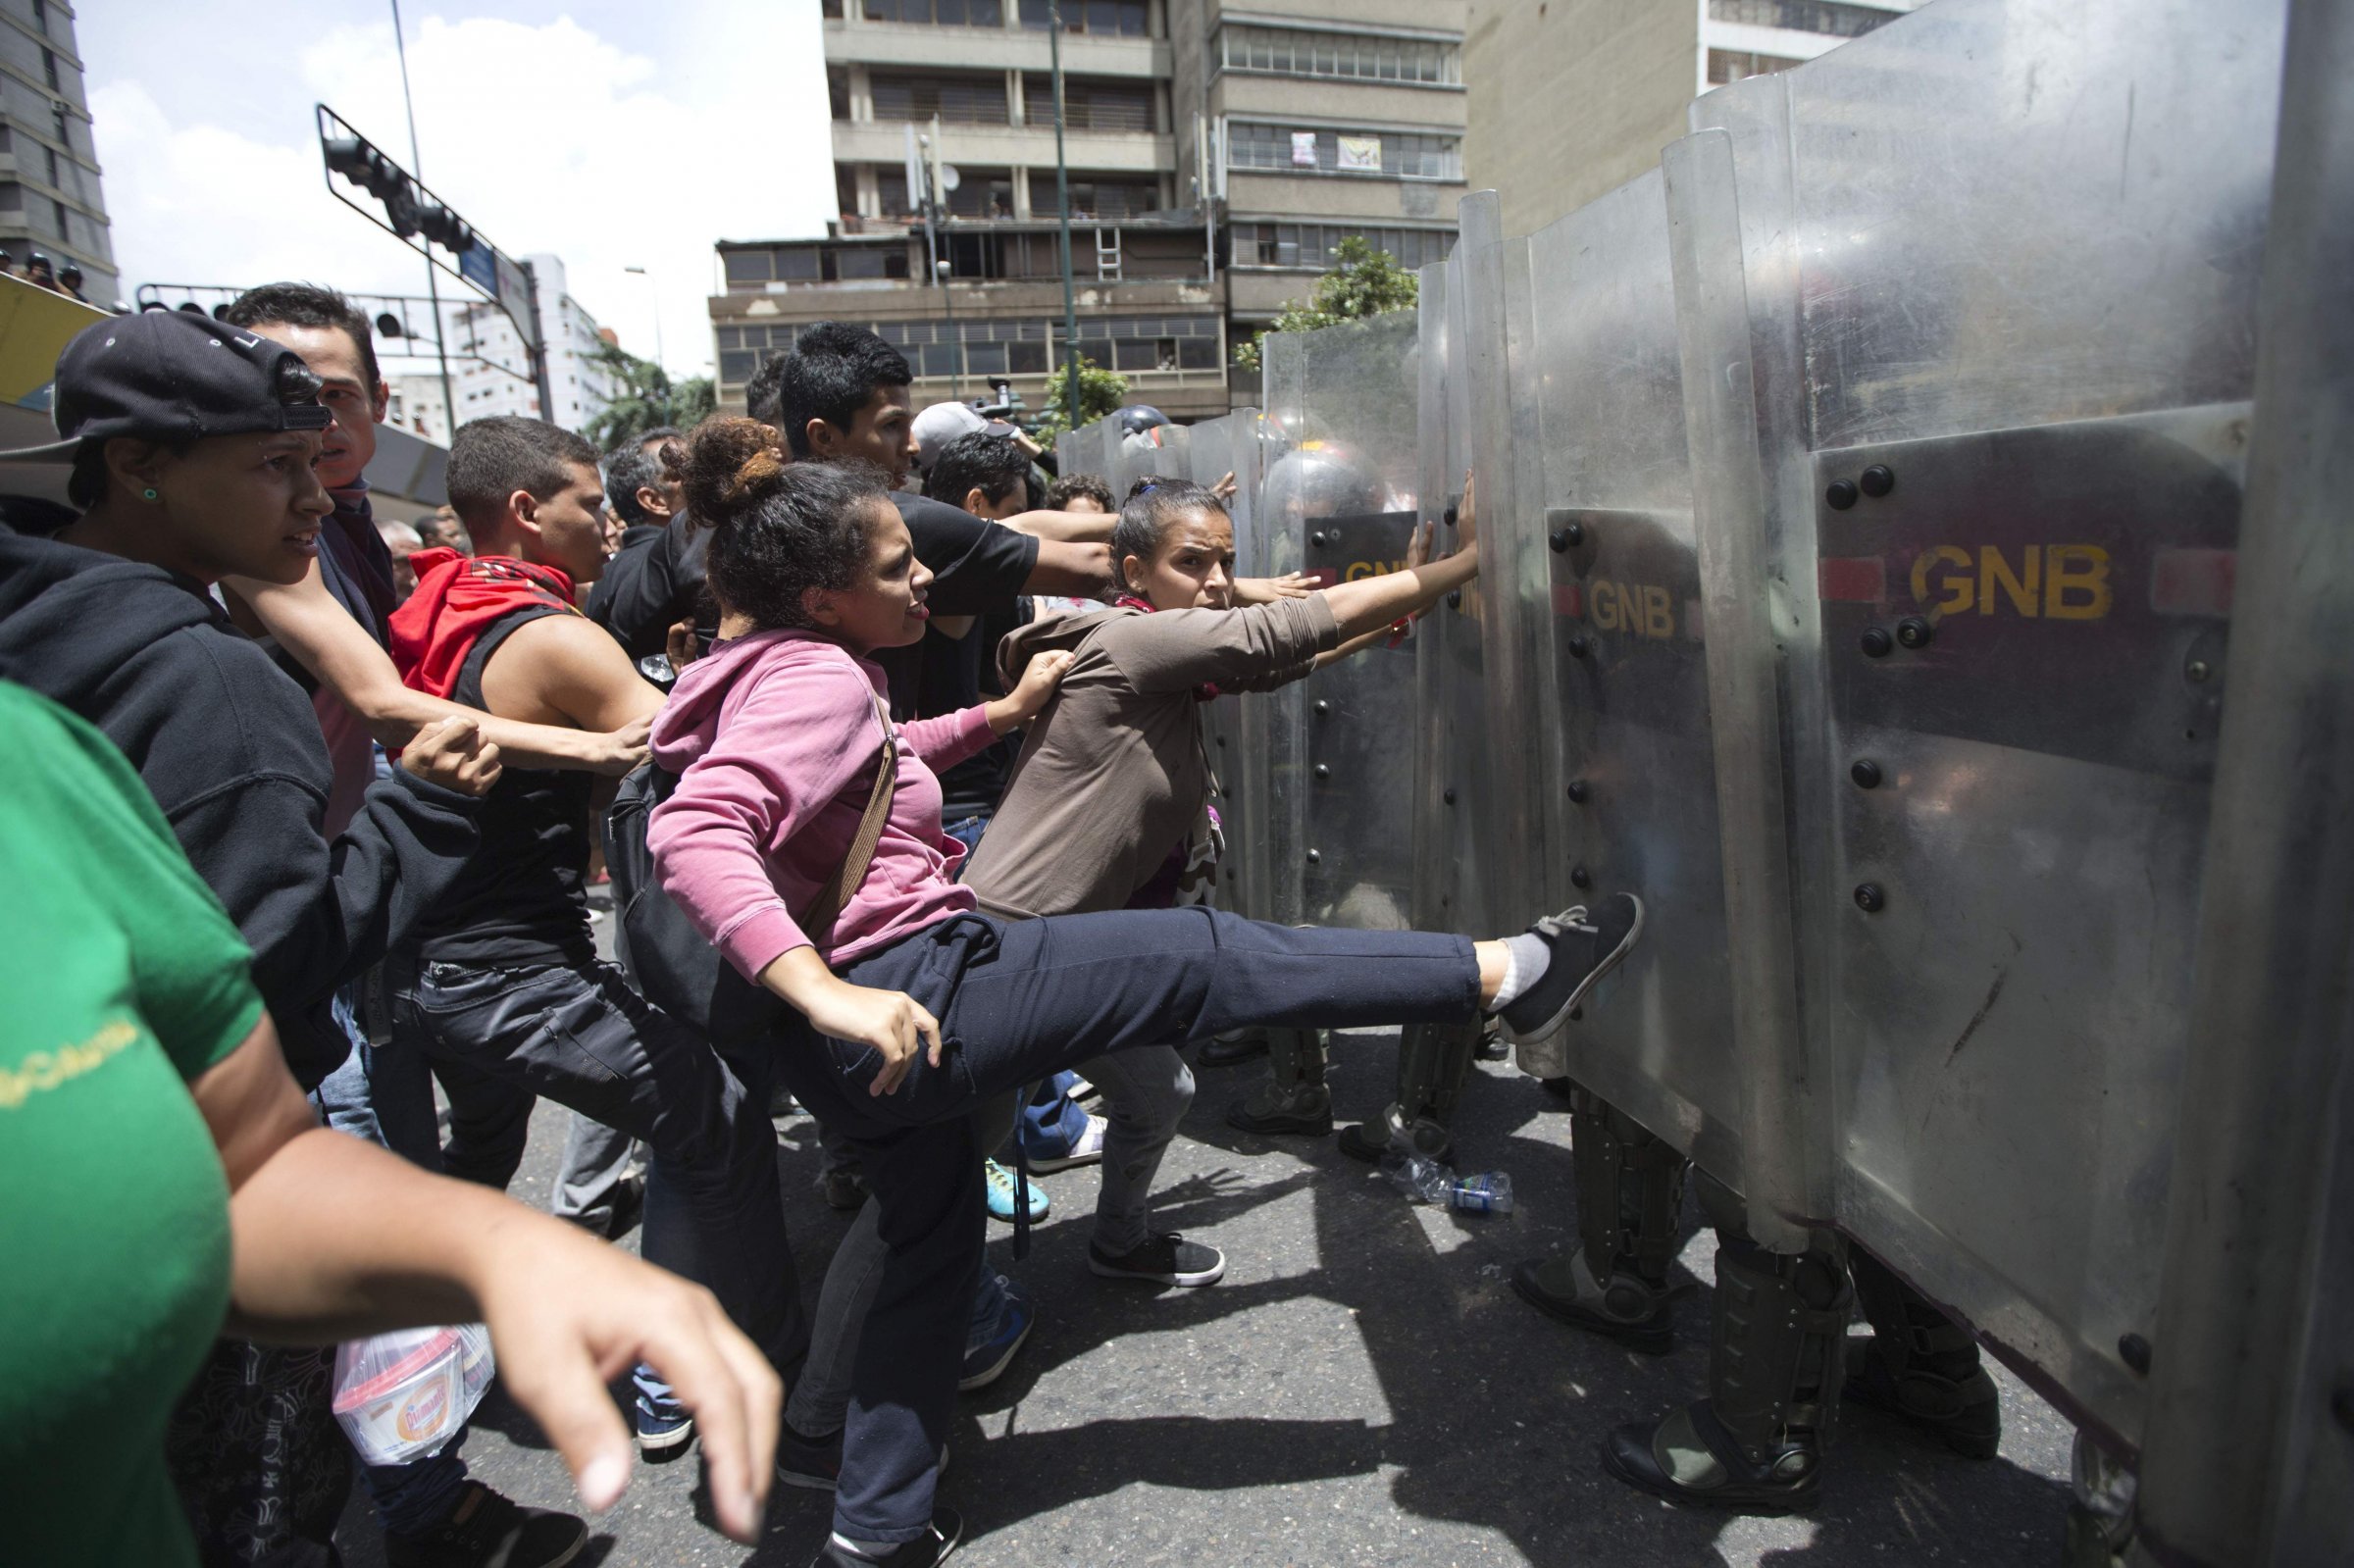 Further Clashes In Venezuela After Deadly Unrest